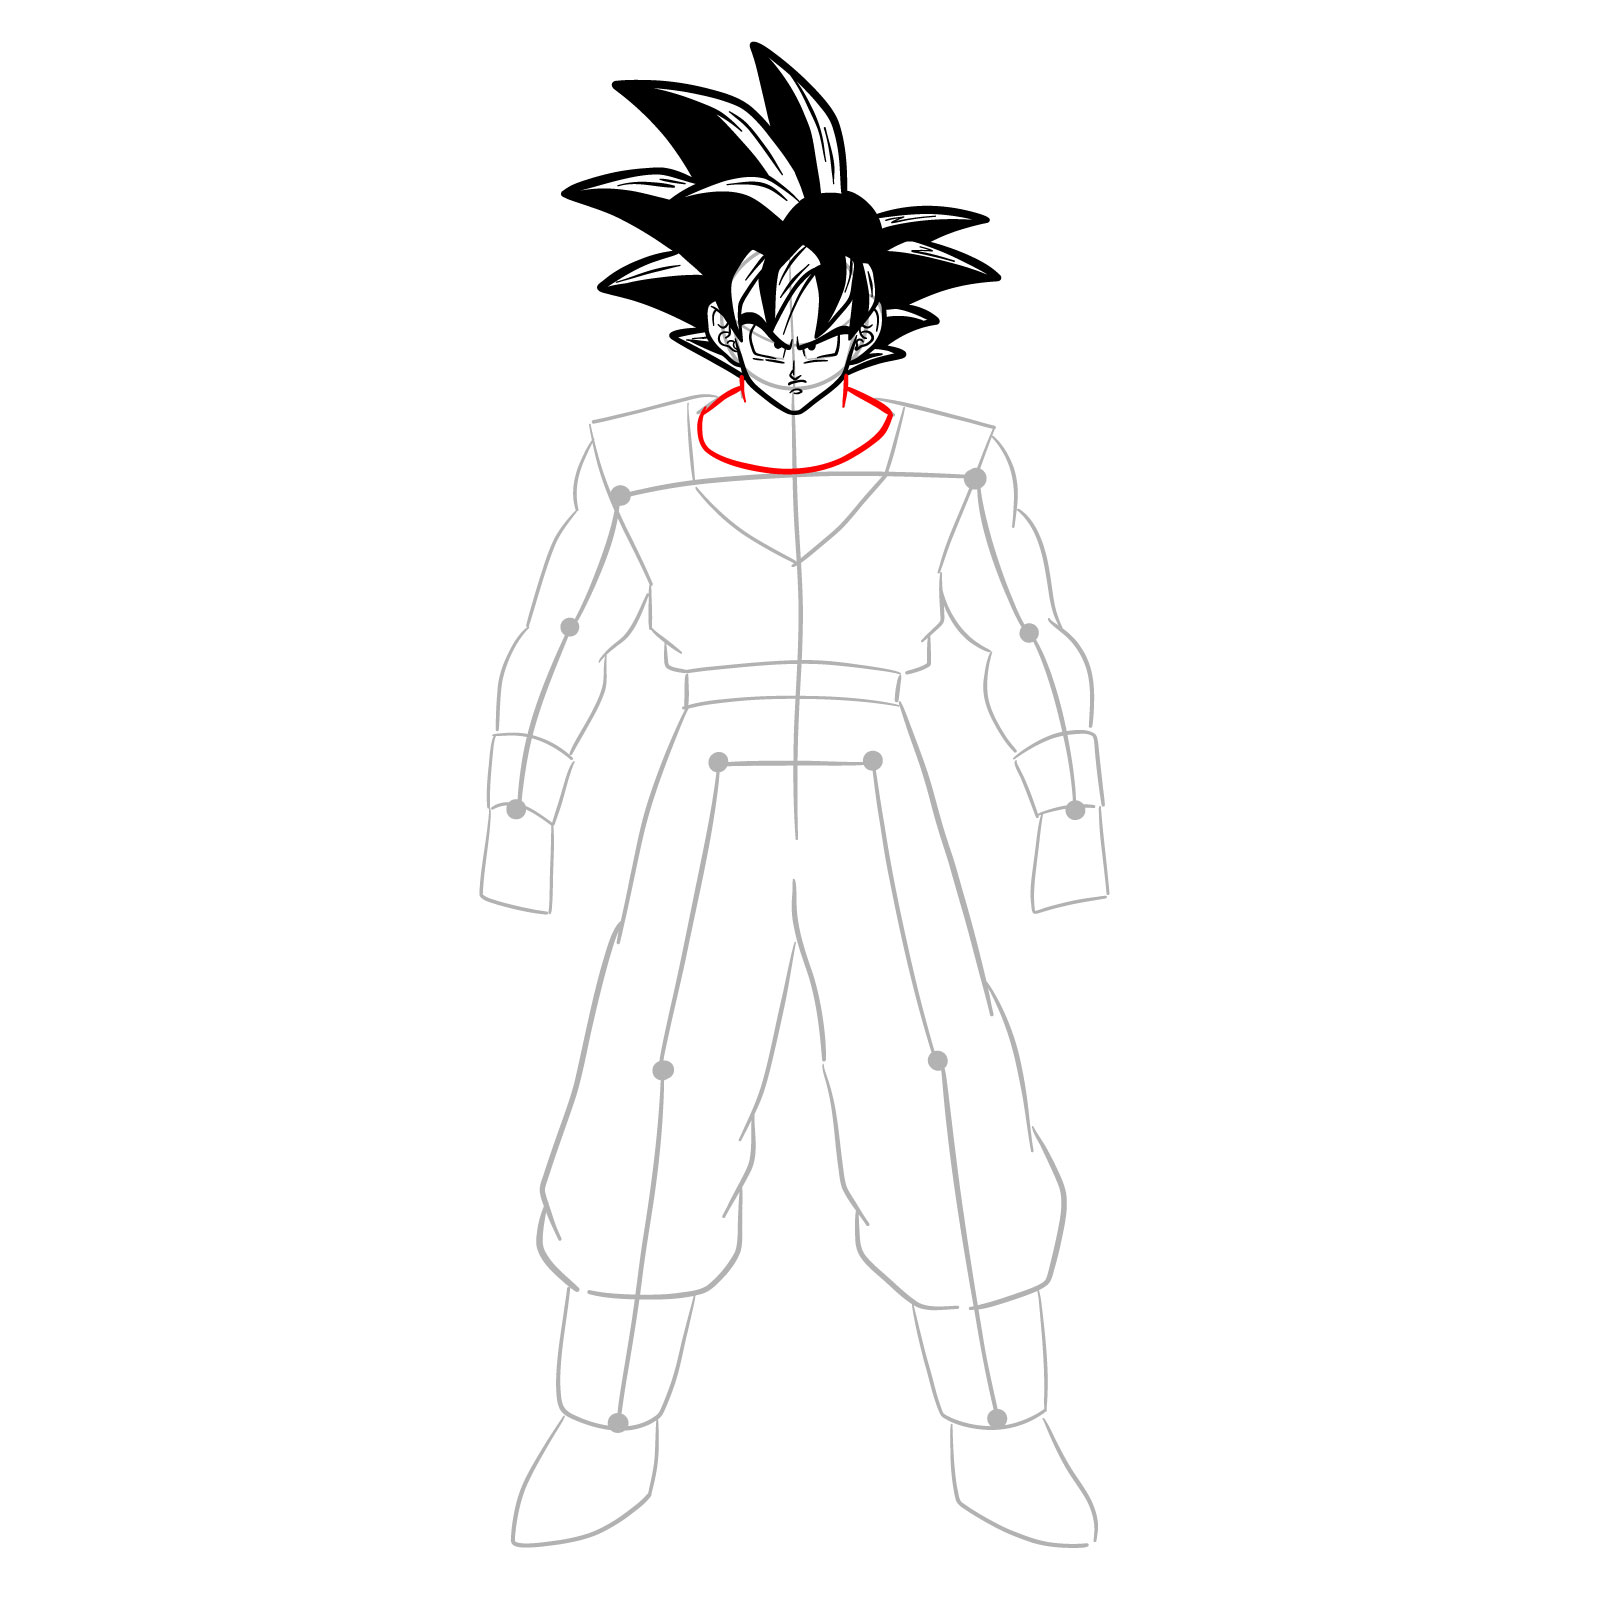 Drawing Goku All Transformations - YouTube